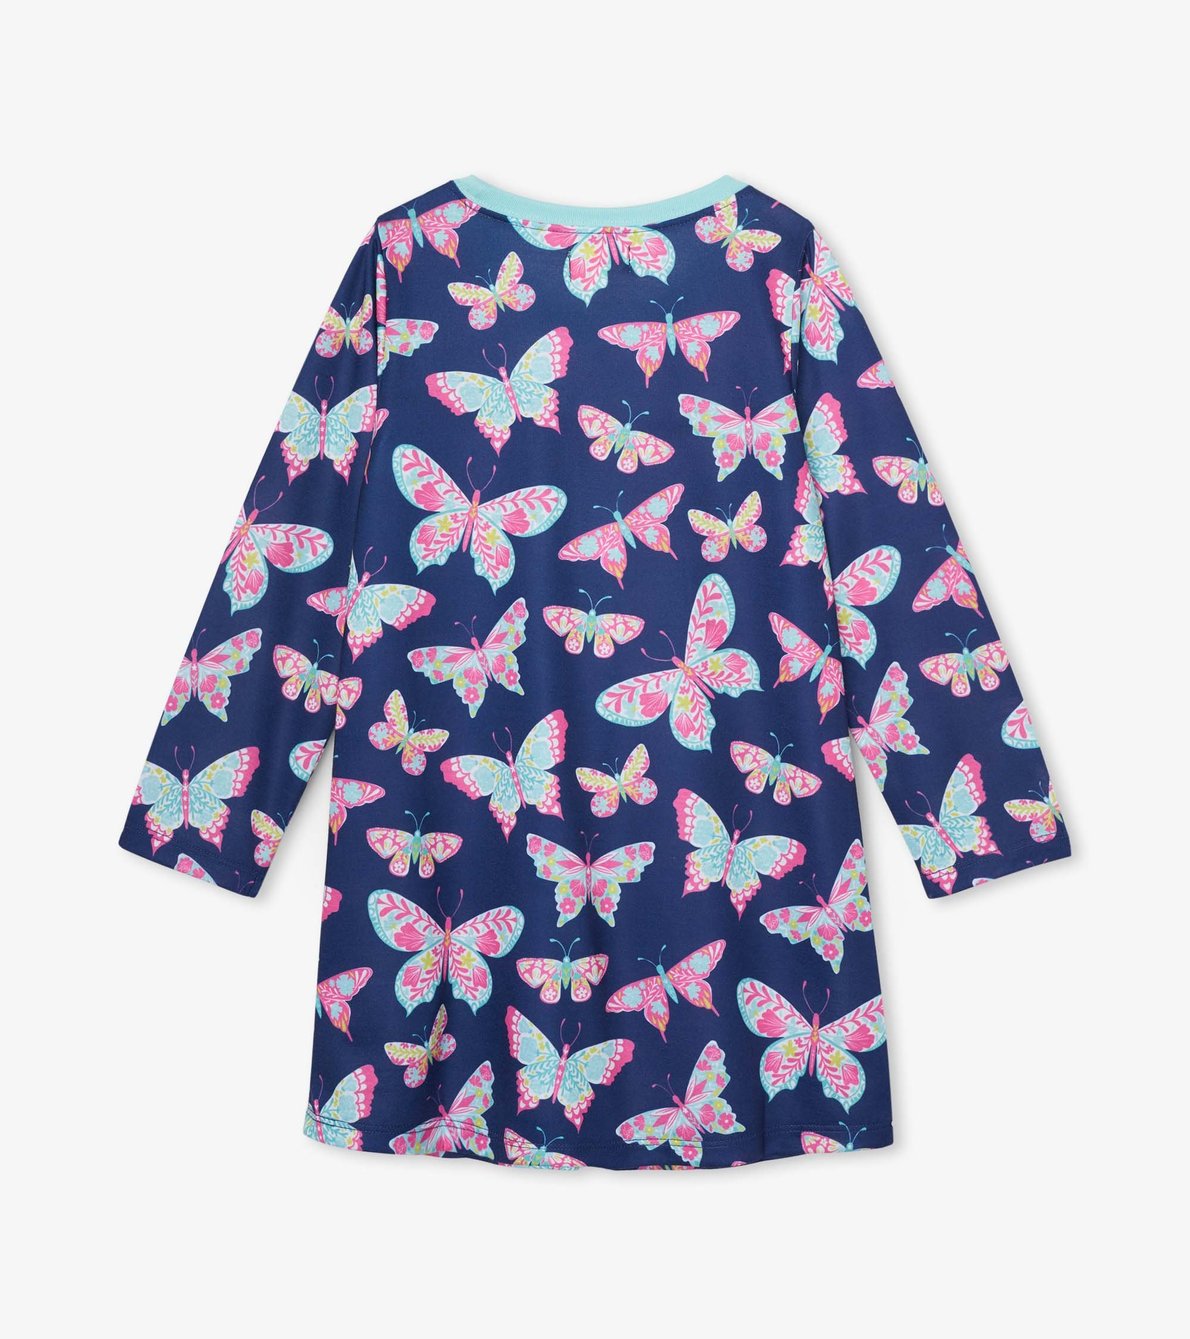 View larger image of Delightful Butterflies Long Sleeve Nightdress